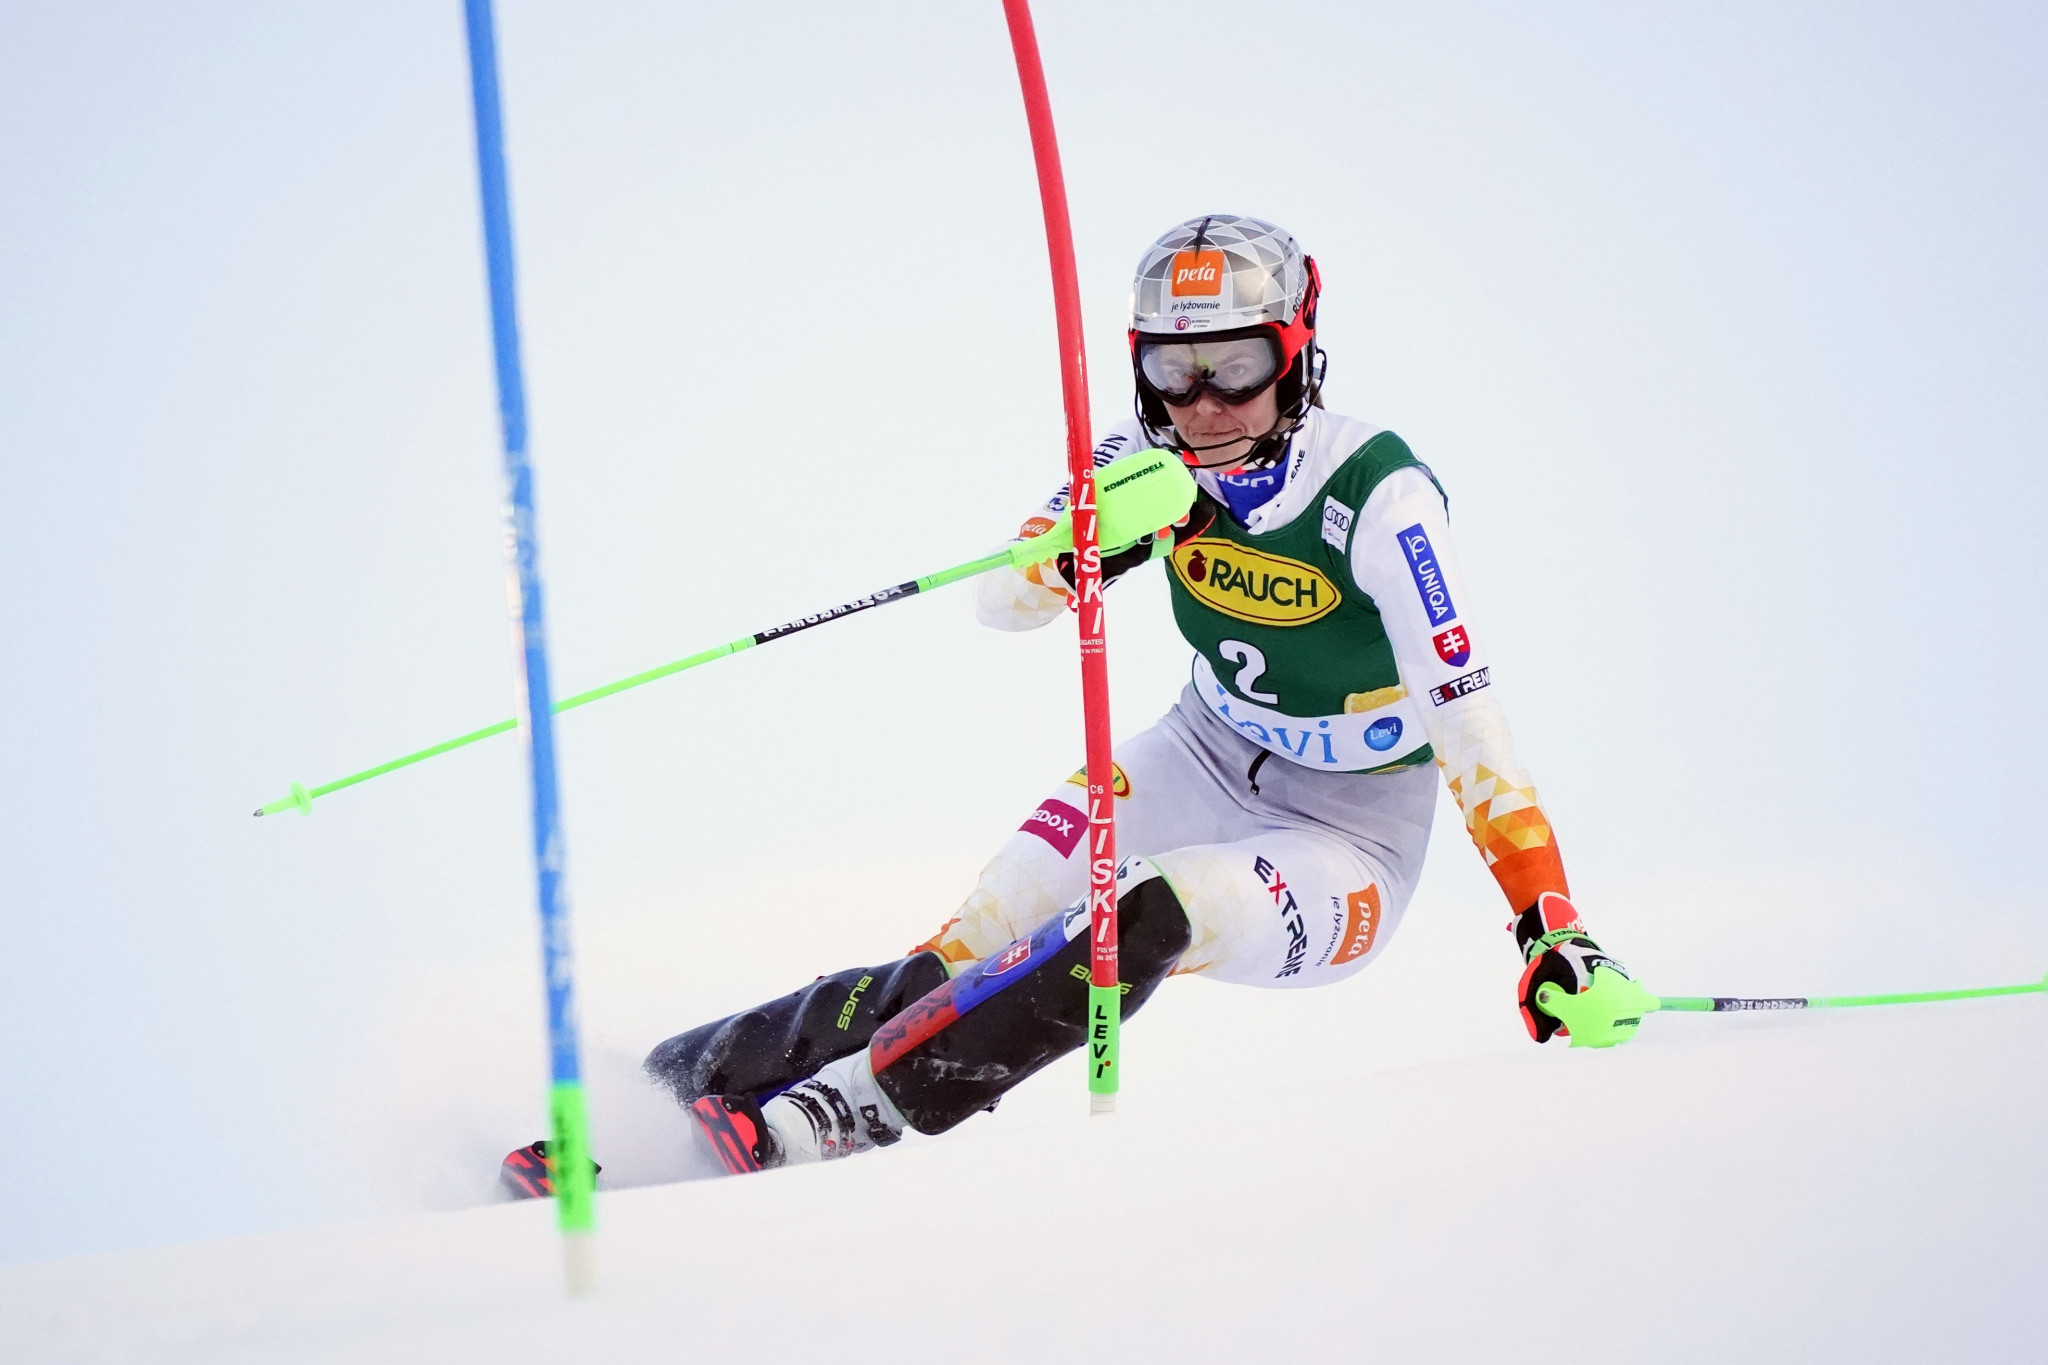 Petra Vlhová won the first of two slalom World Cups in Levi ©Getty Images